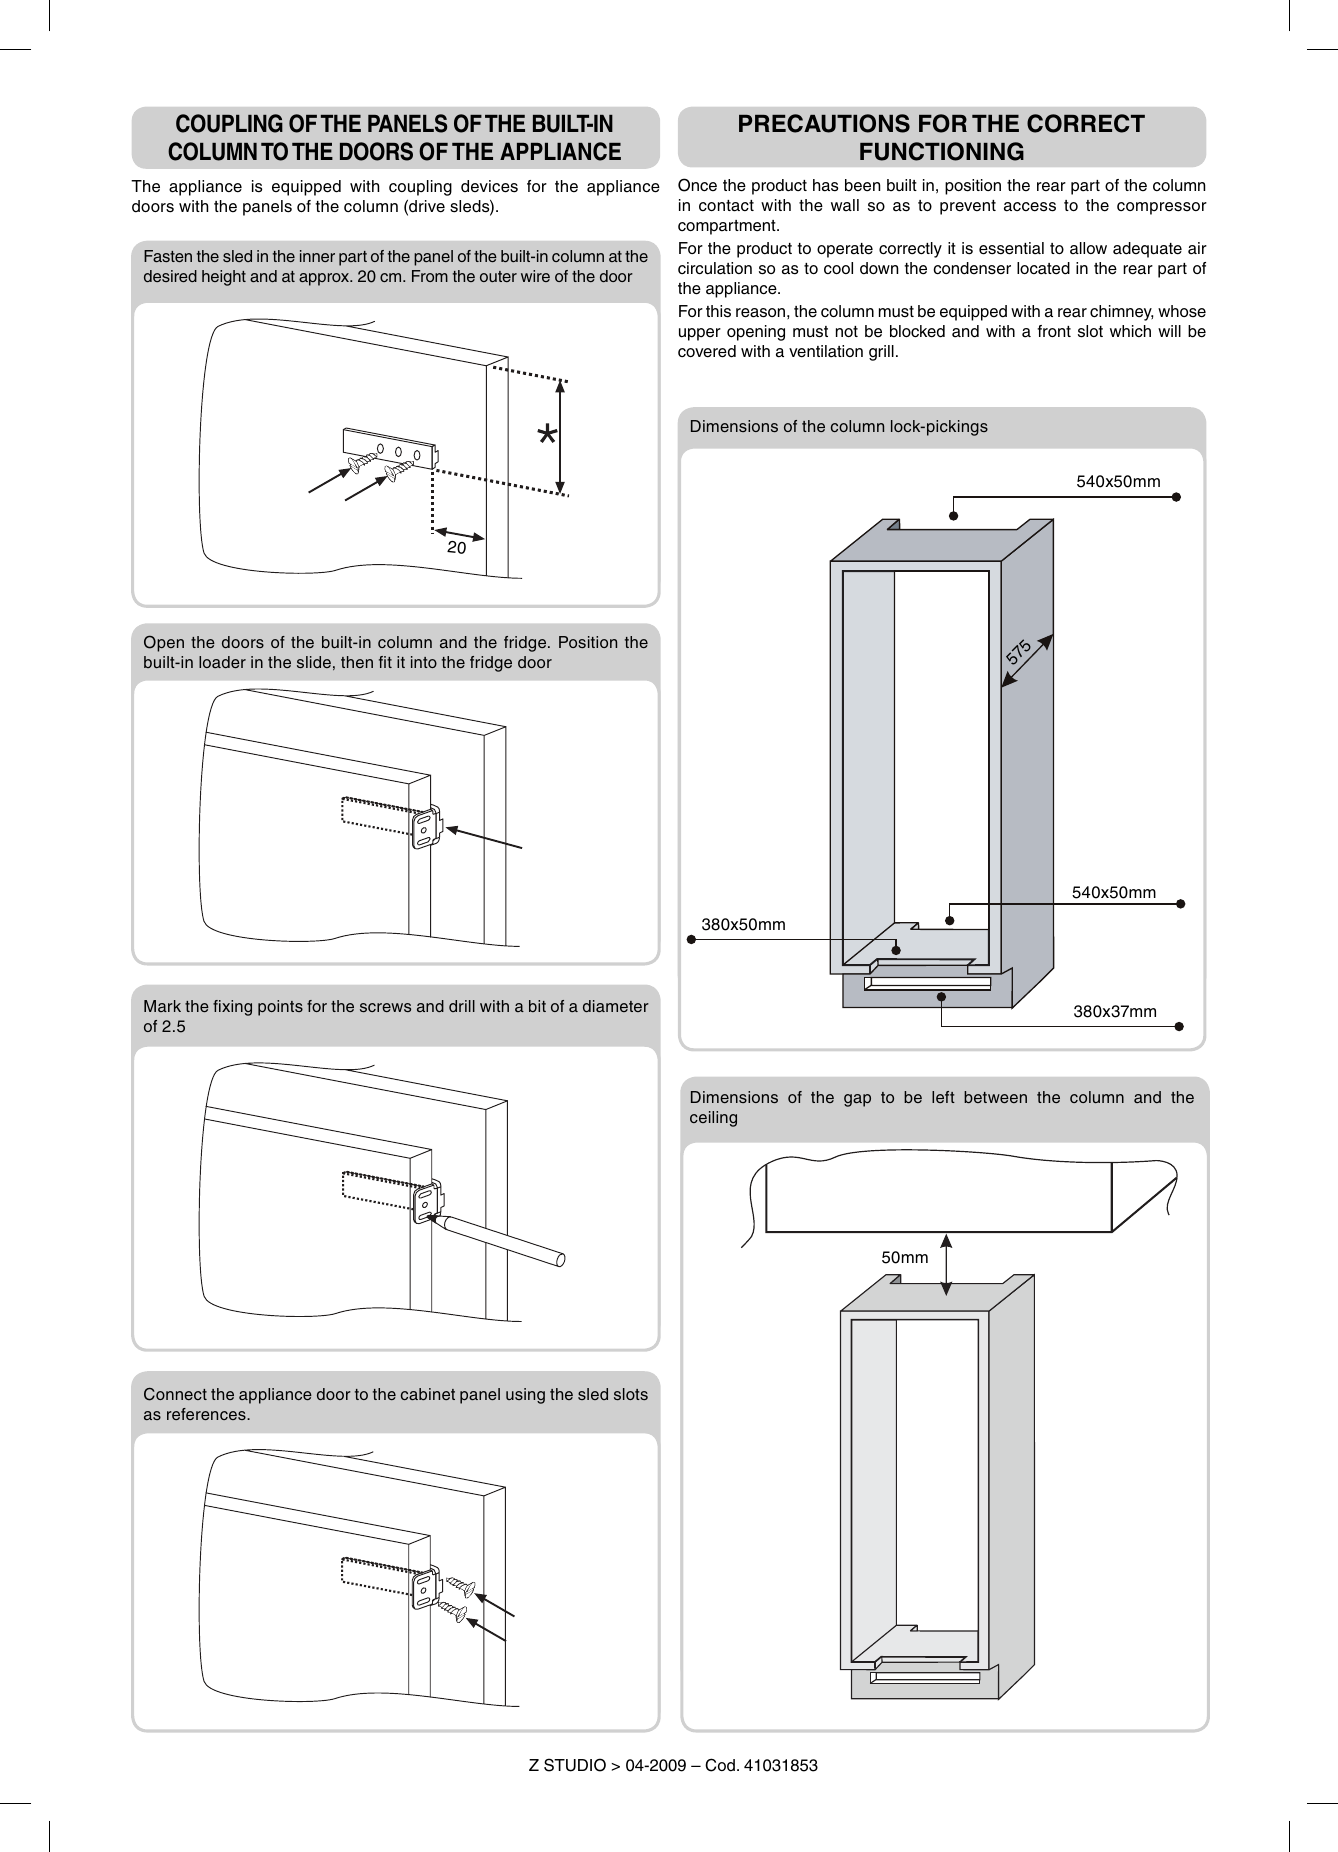 Page 5 of 5 - Hoover Frost Free Fully Integrated Fridge Freezer HFFB 3050AK Instruction Manual - Product Code 34900186 HFFB3050AK